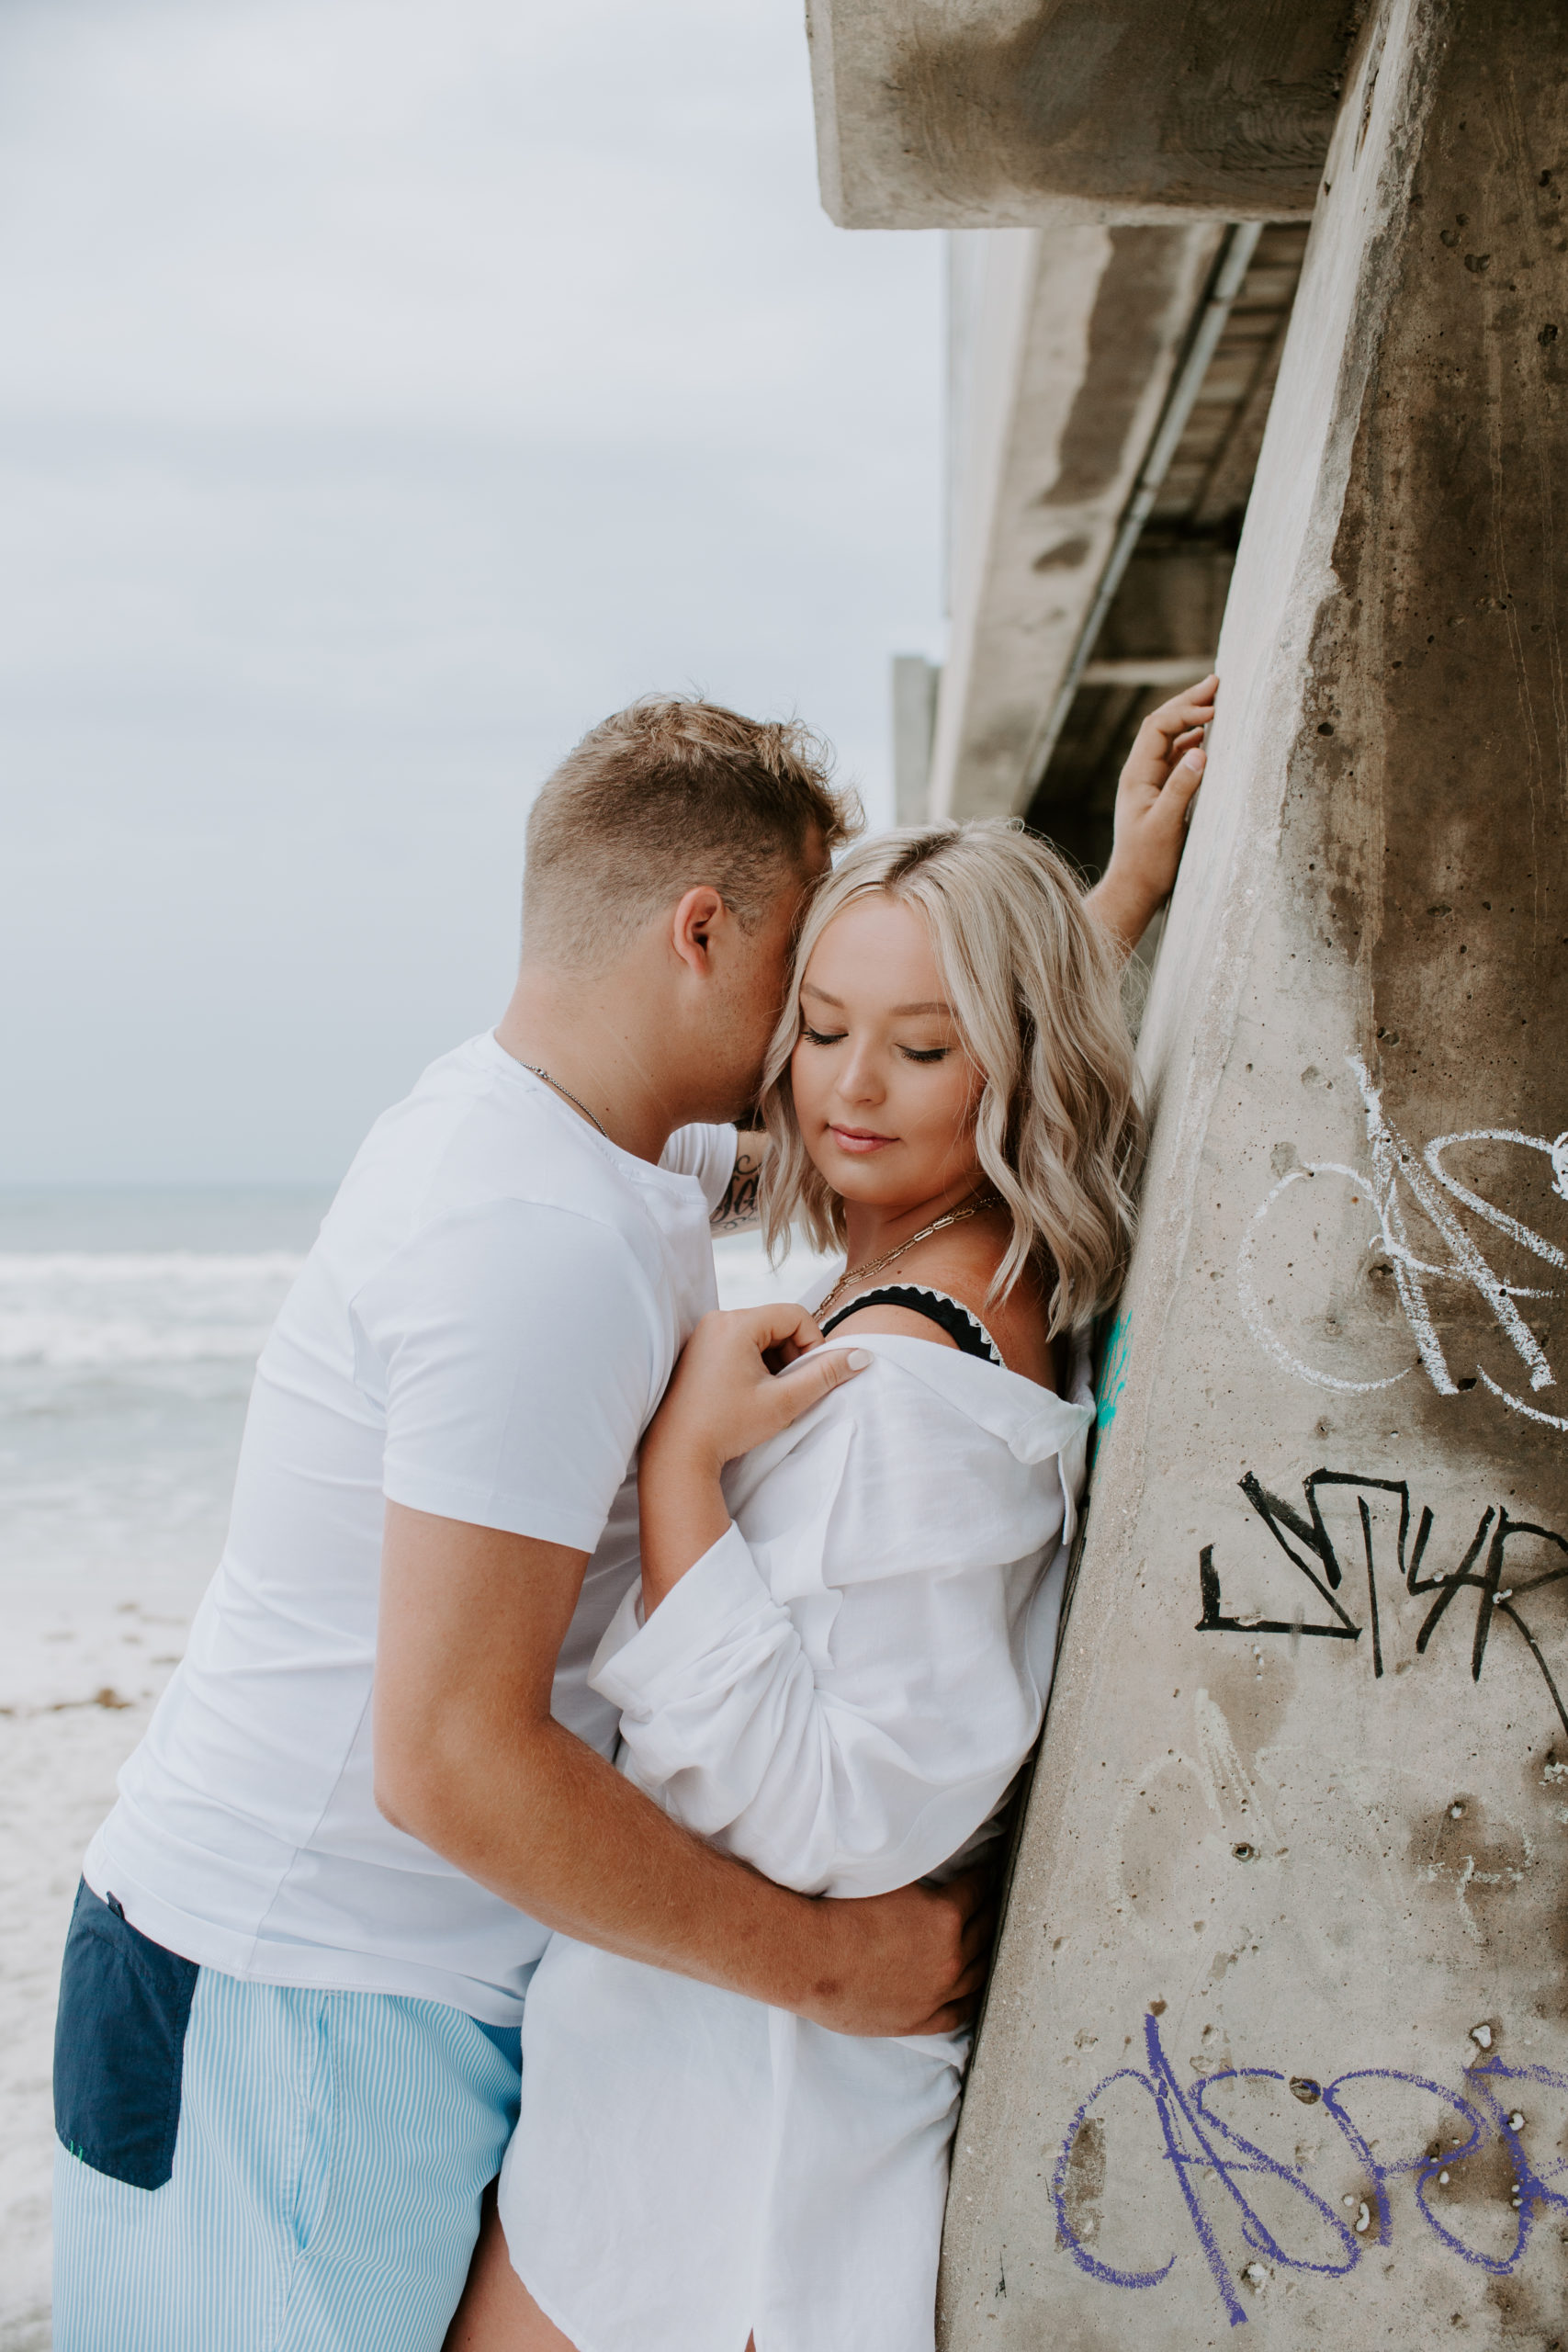 Couple leaning up against a fishing pier with the woman holding up the edge of her coverup and the man is giving kisses into the side of her head with his arm leaning against the pier during their beach engagement photos